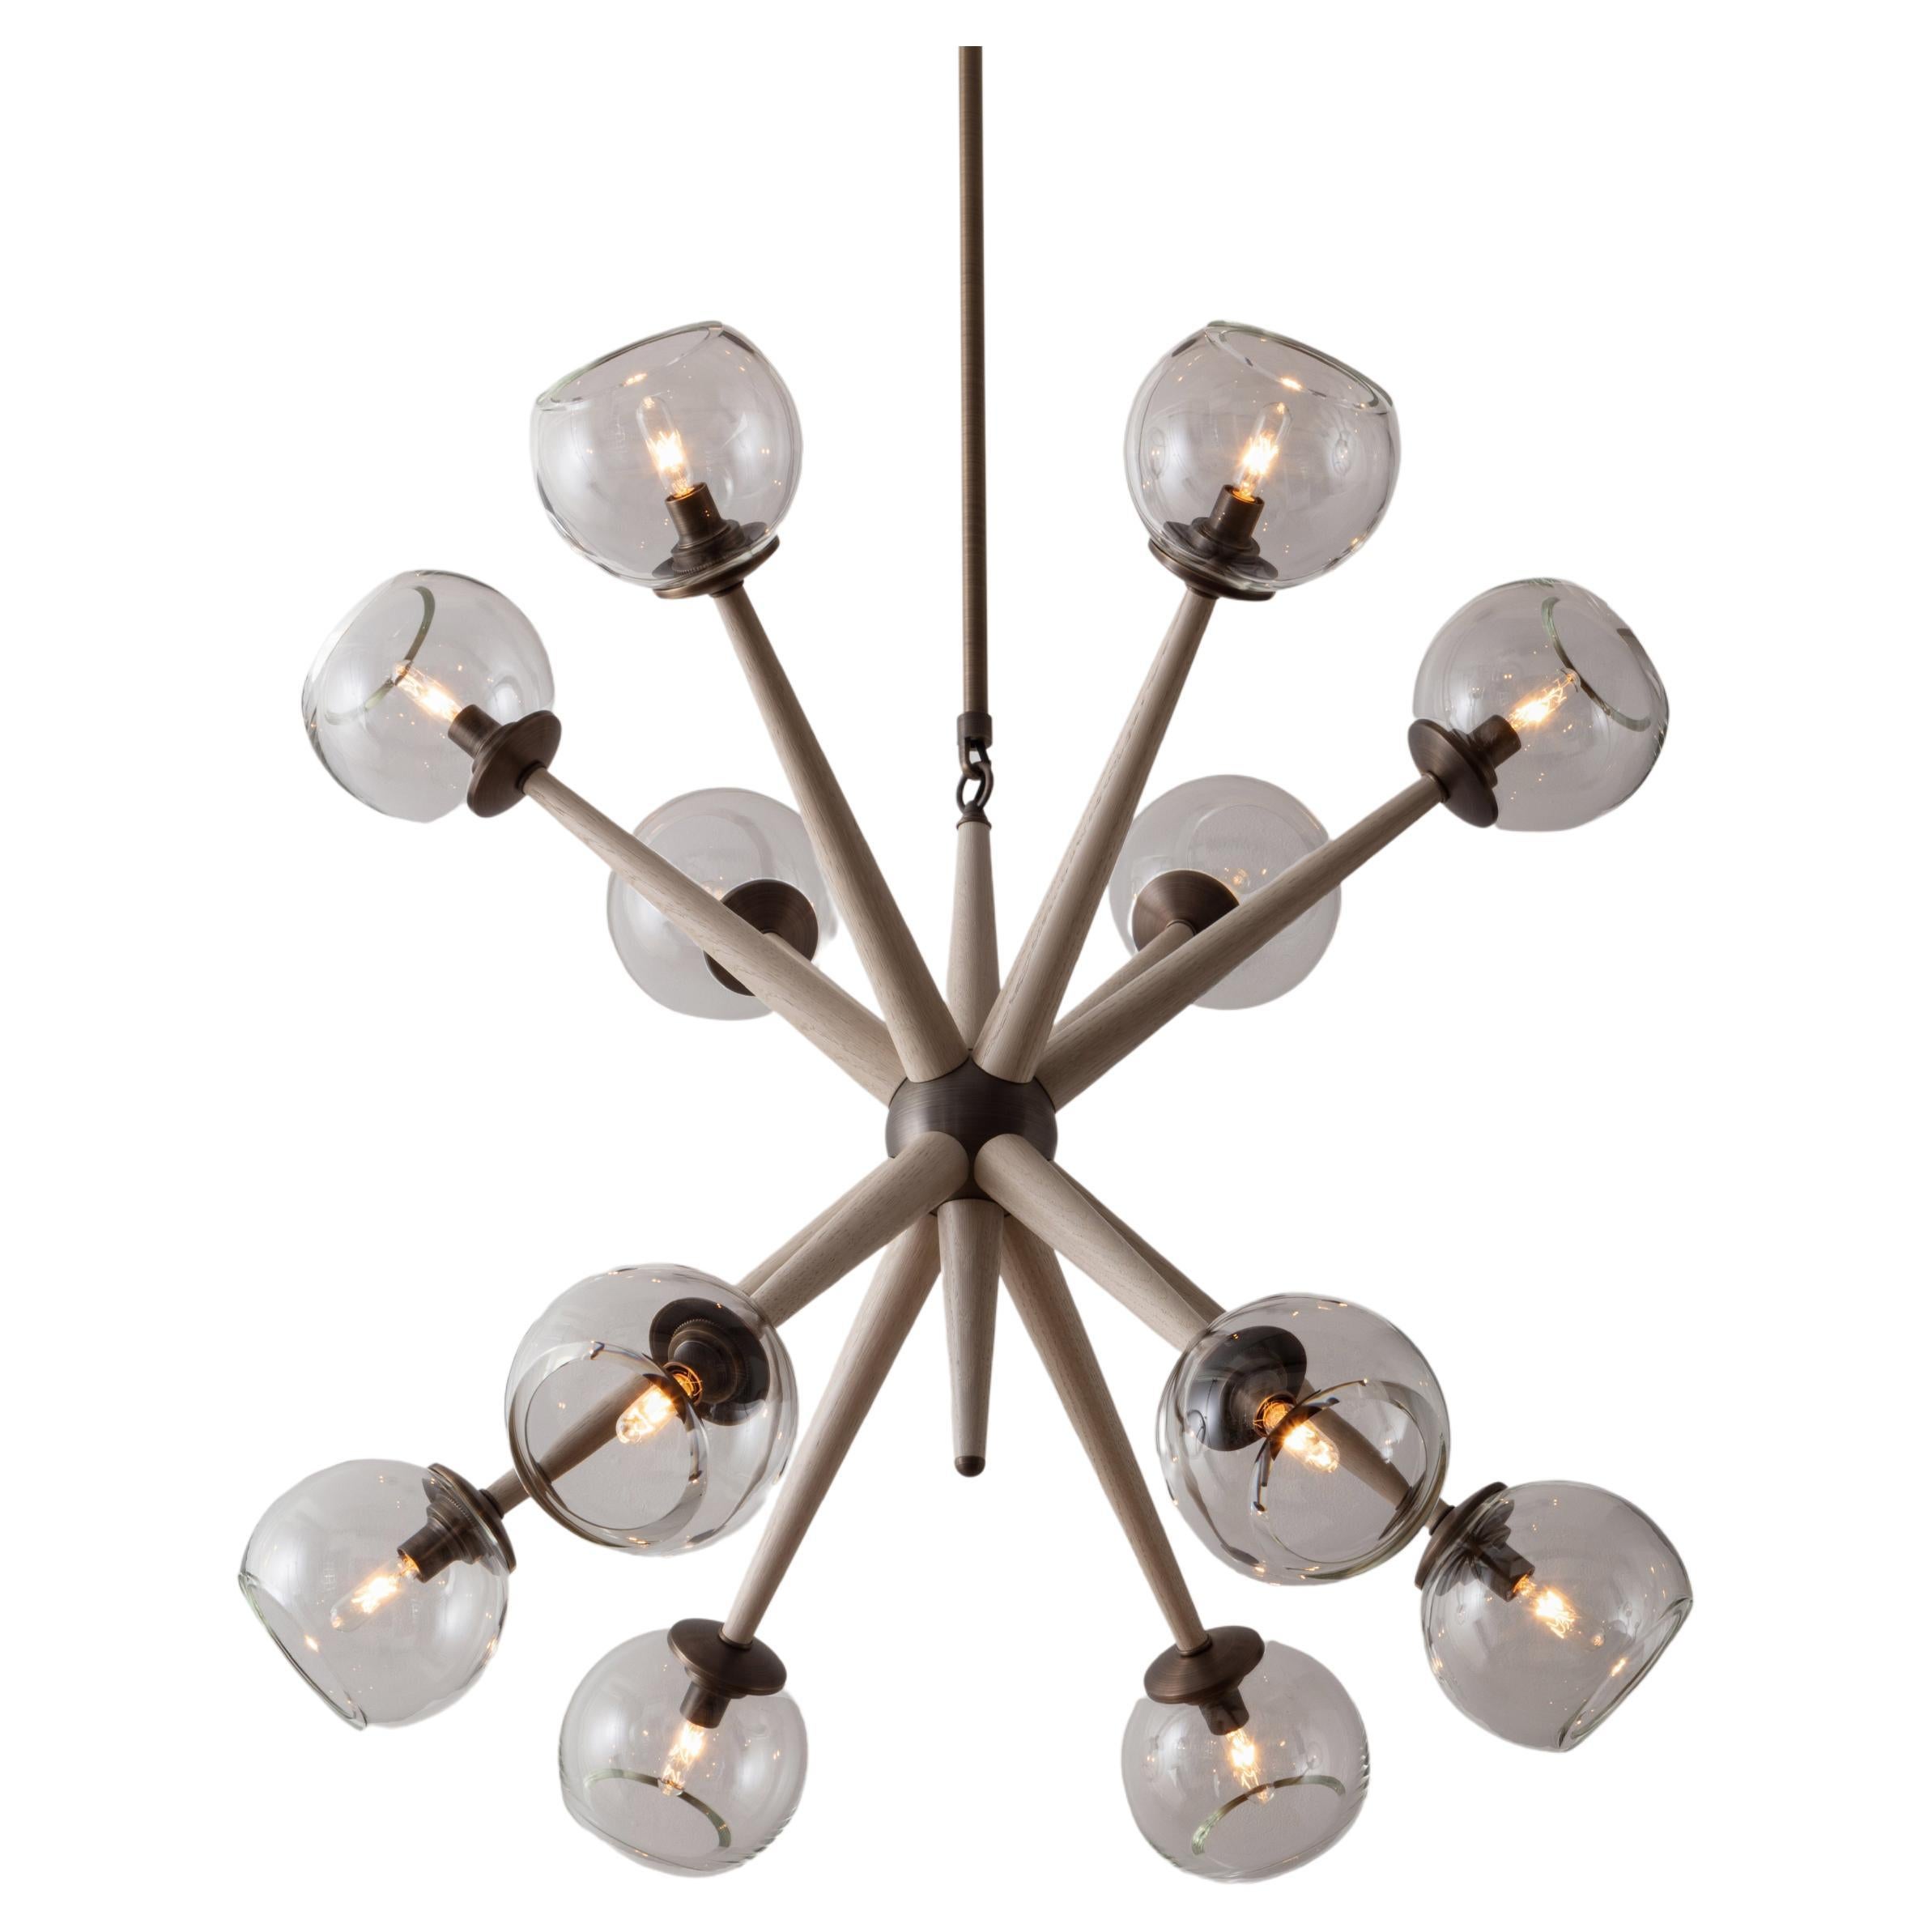 Giotto Burst (6.6) Chandelier in Oak and Brass Finishes By Matthew Fairbank For Sale